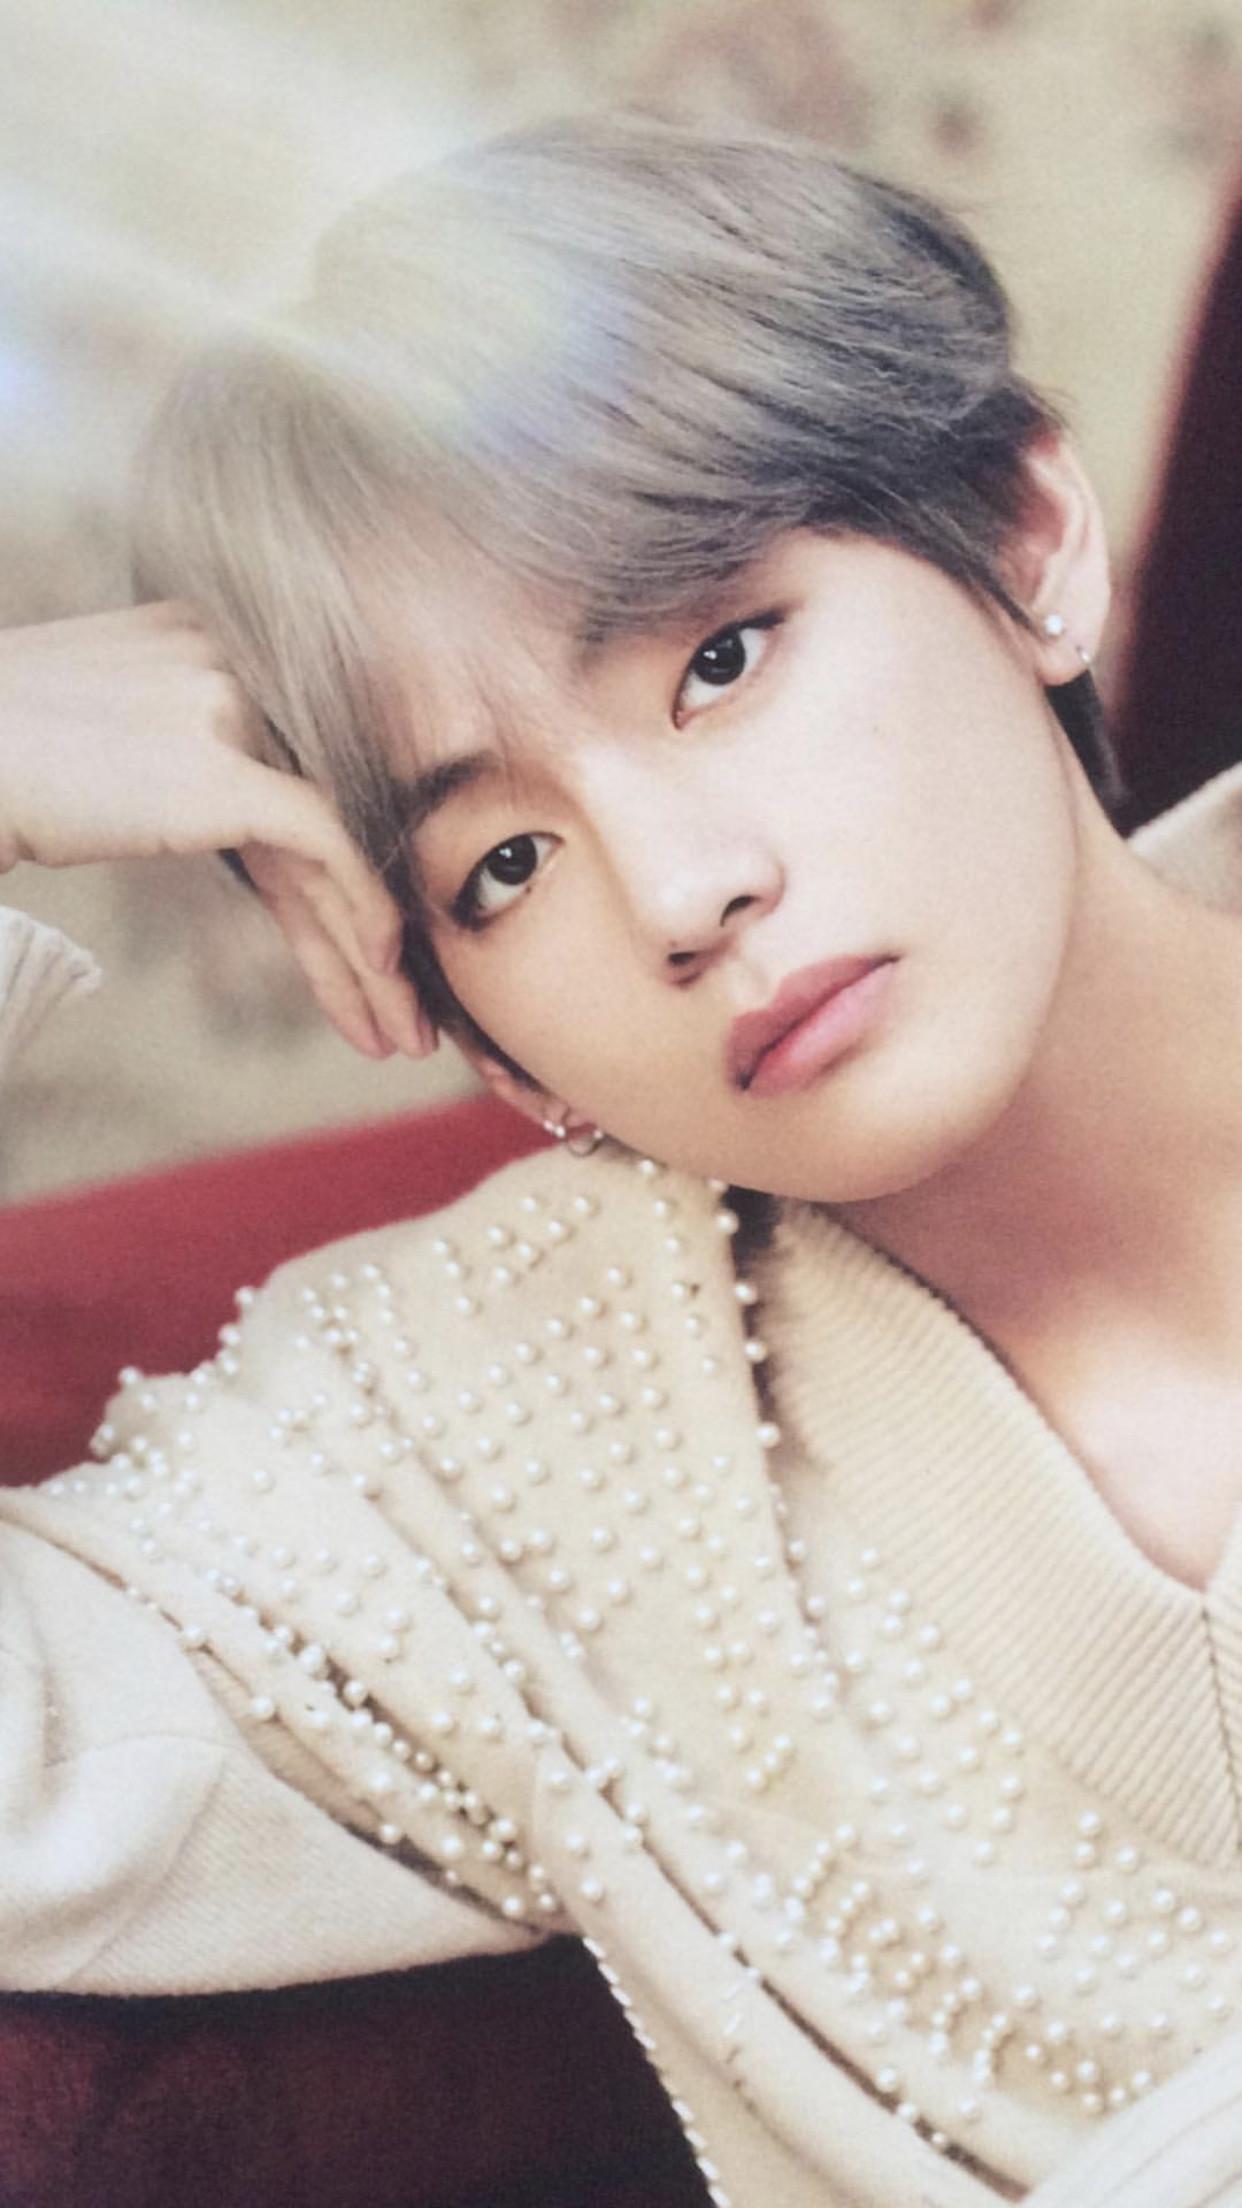 15 Greatest wallpaper aesthetic taehyung bts You Can Save It Without A ...